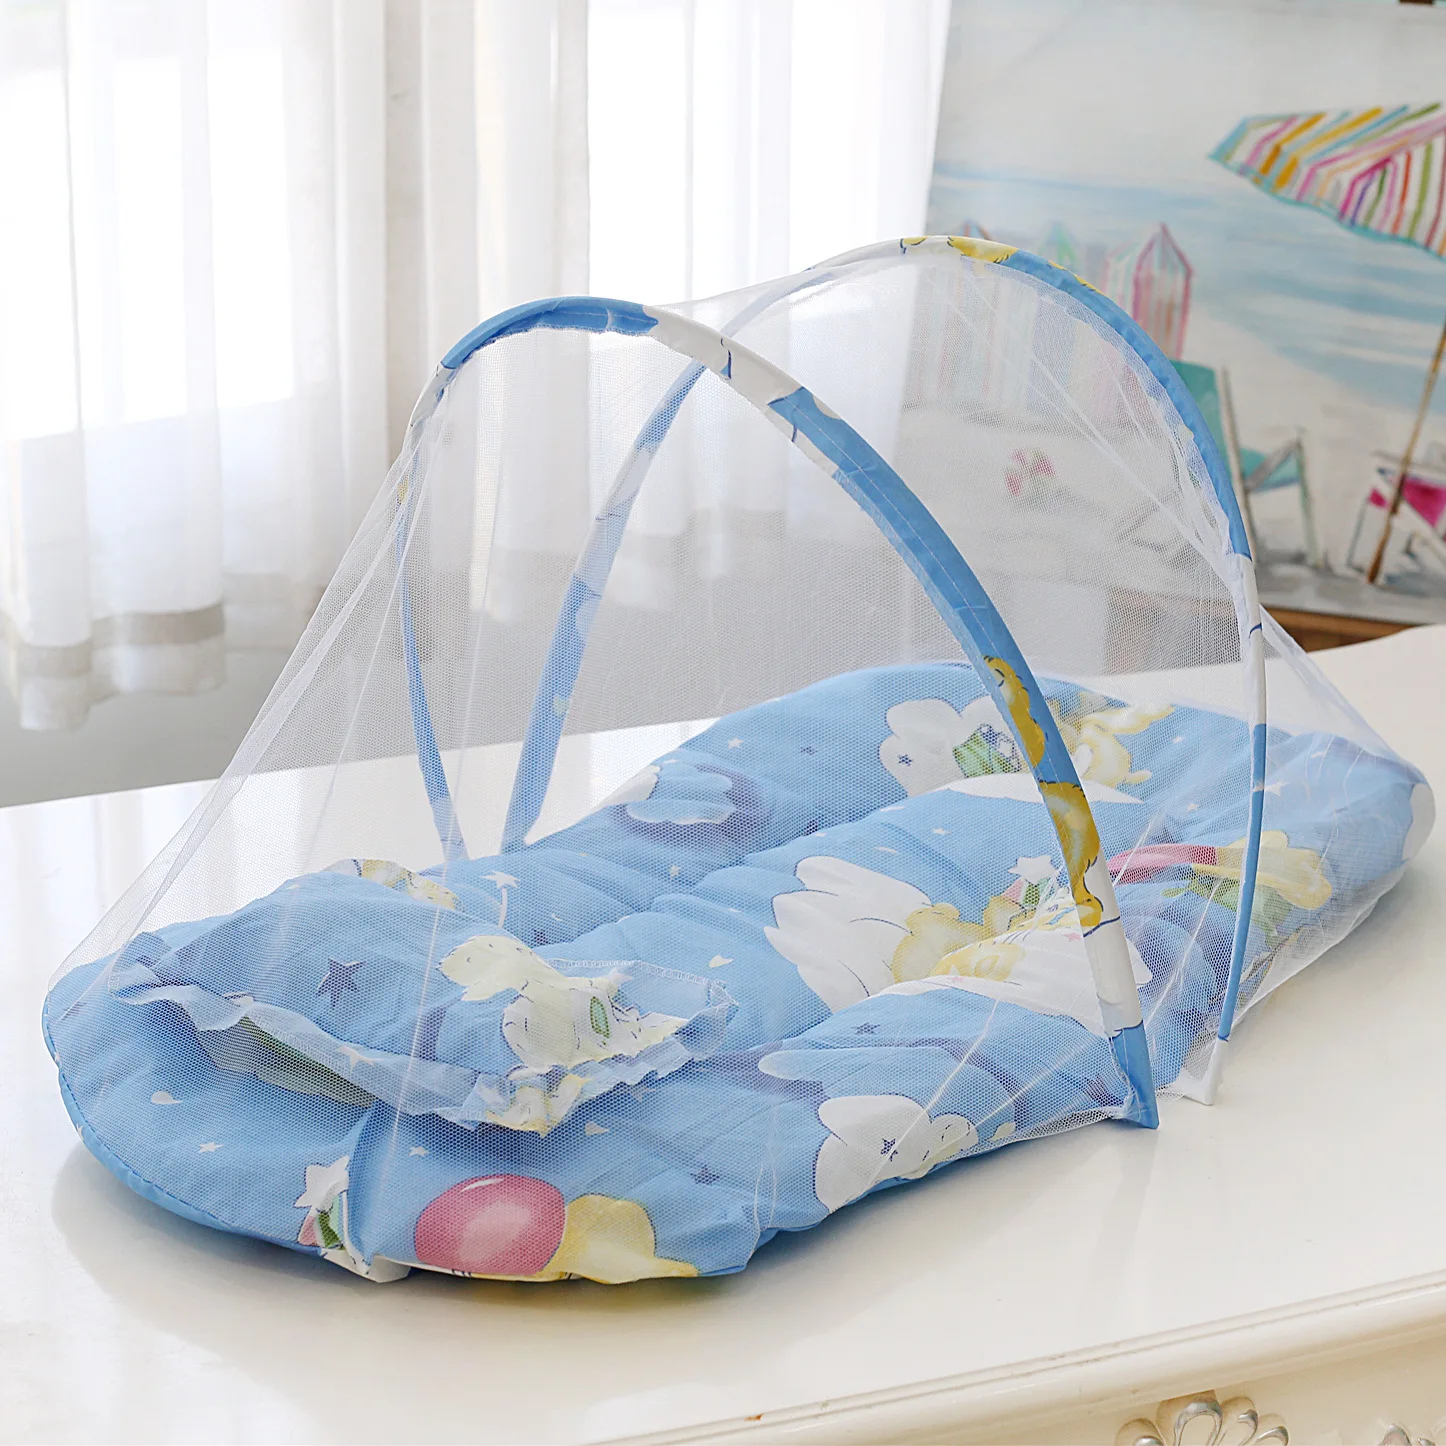 New Mosquito Net Baby Crib Portable Foldable Infant Bed Zipper Cradles For Newborns 0-2years Crib Sleeping Cushion With Pillow